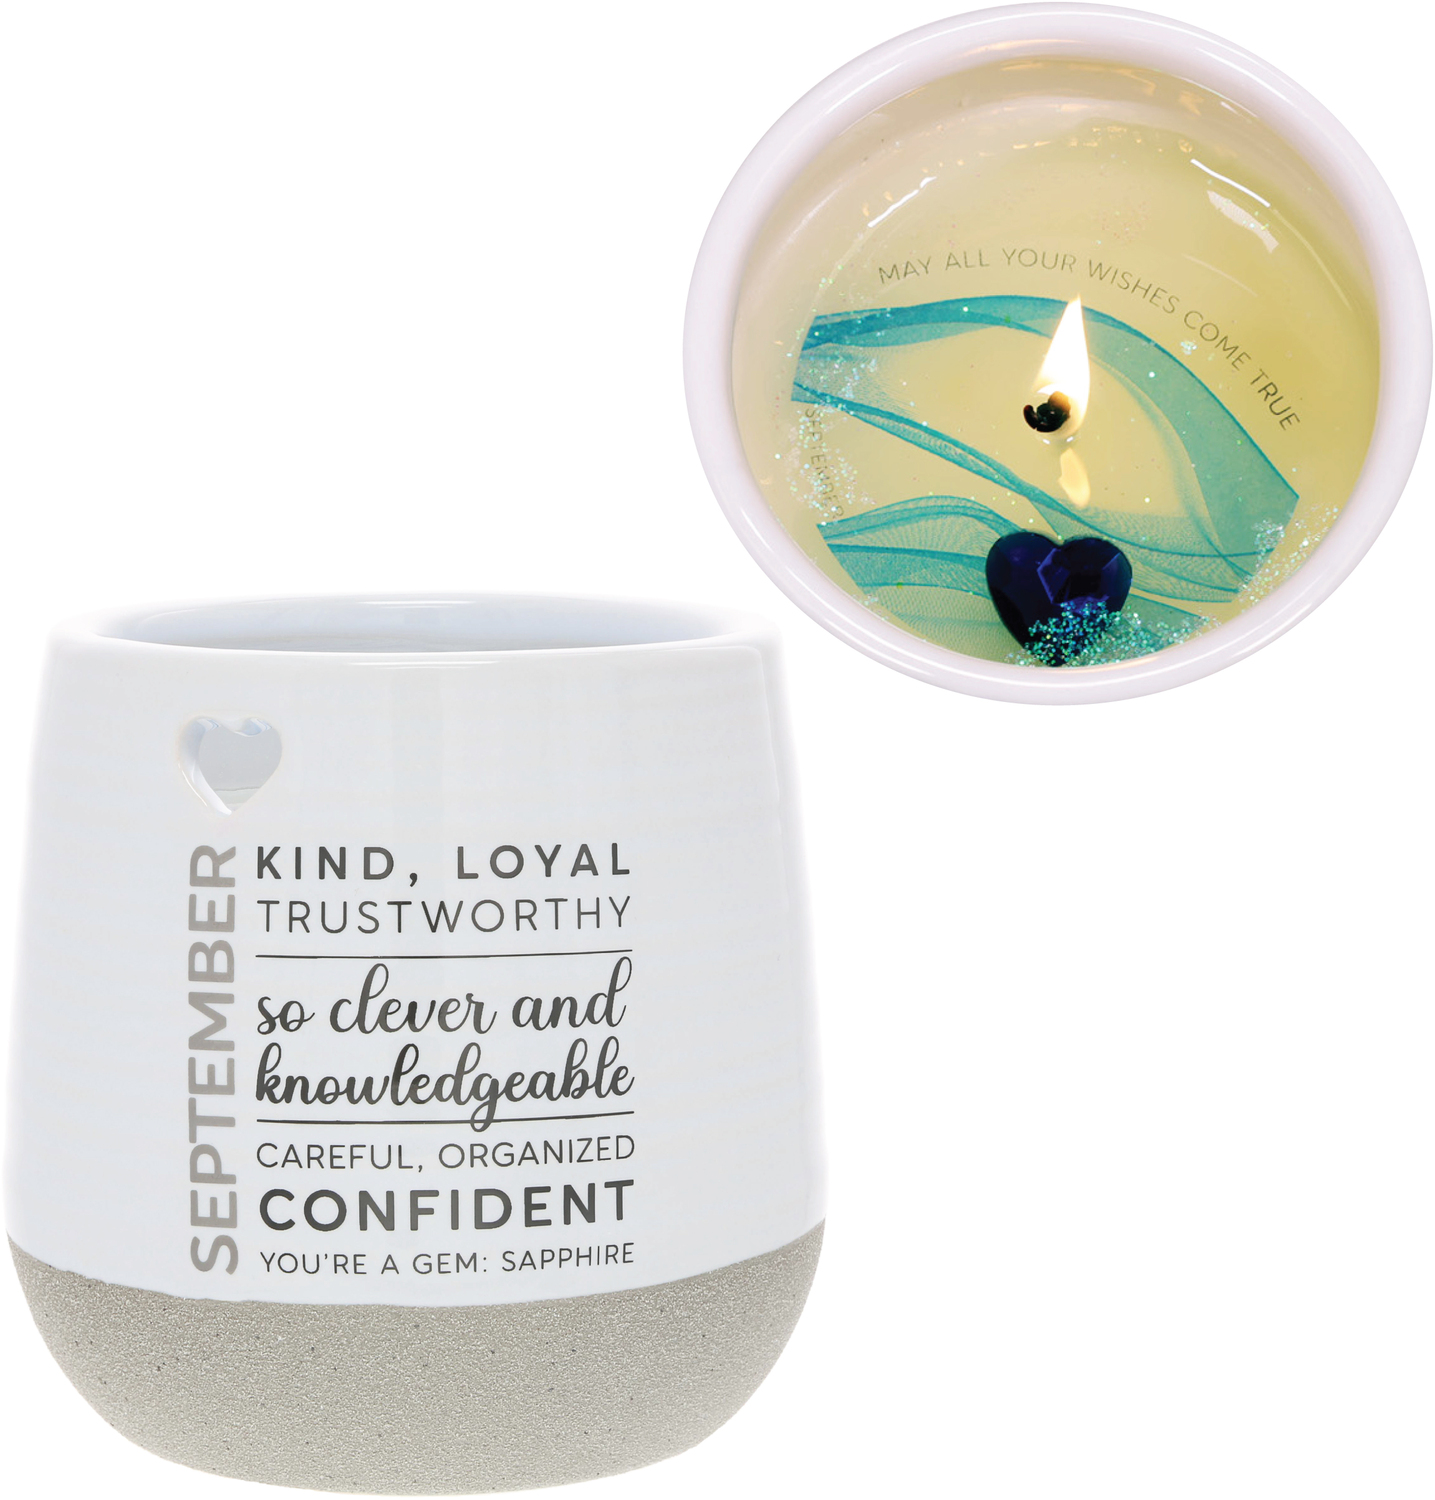 September by You Are a Gem - September - 11 oz - 100% Soy Wax Reveal Candle with Birthstone Scent: Tranquility